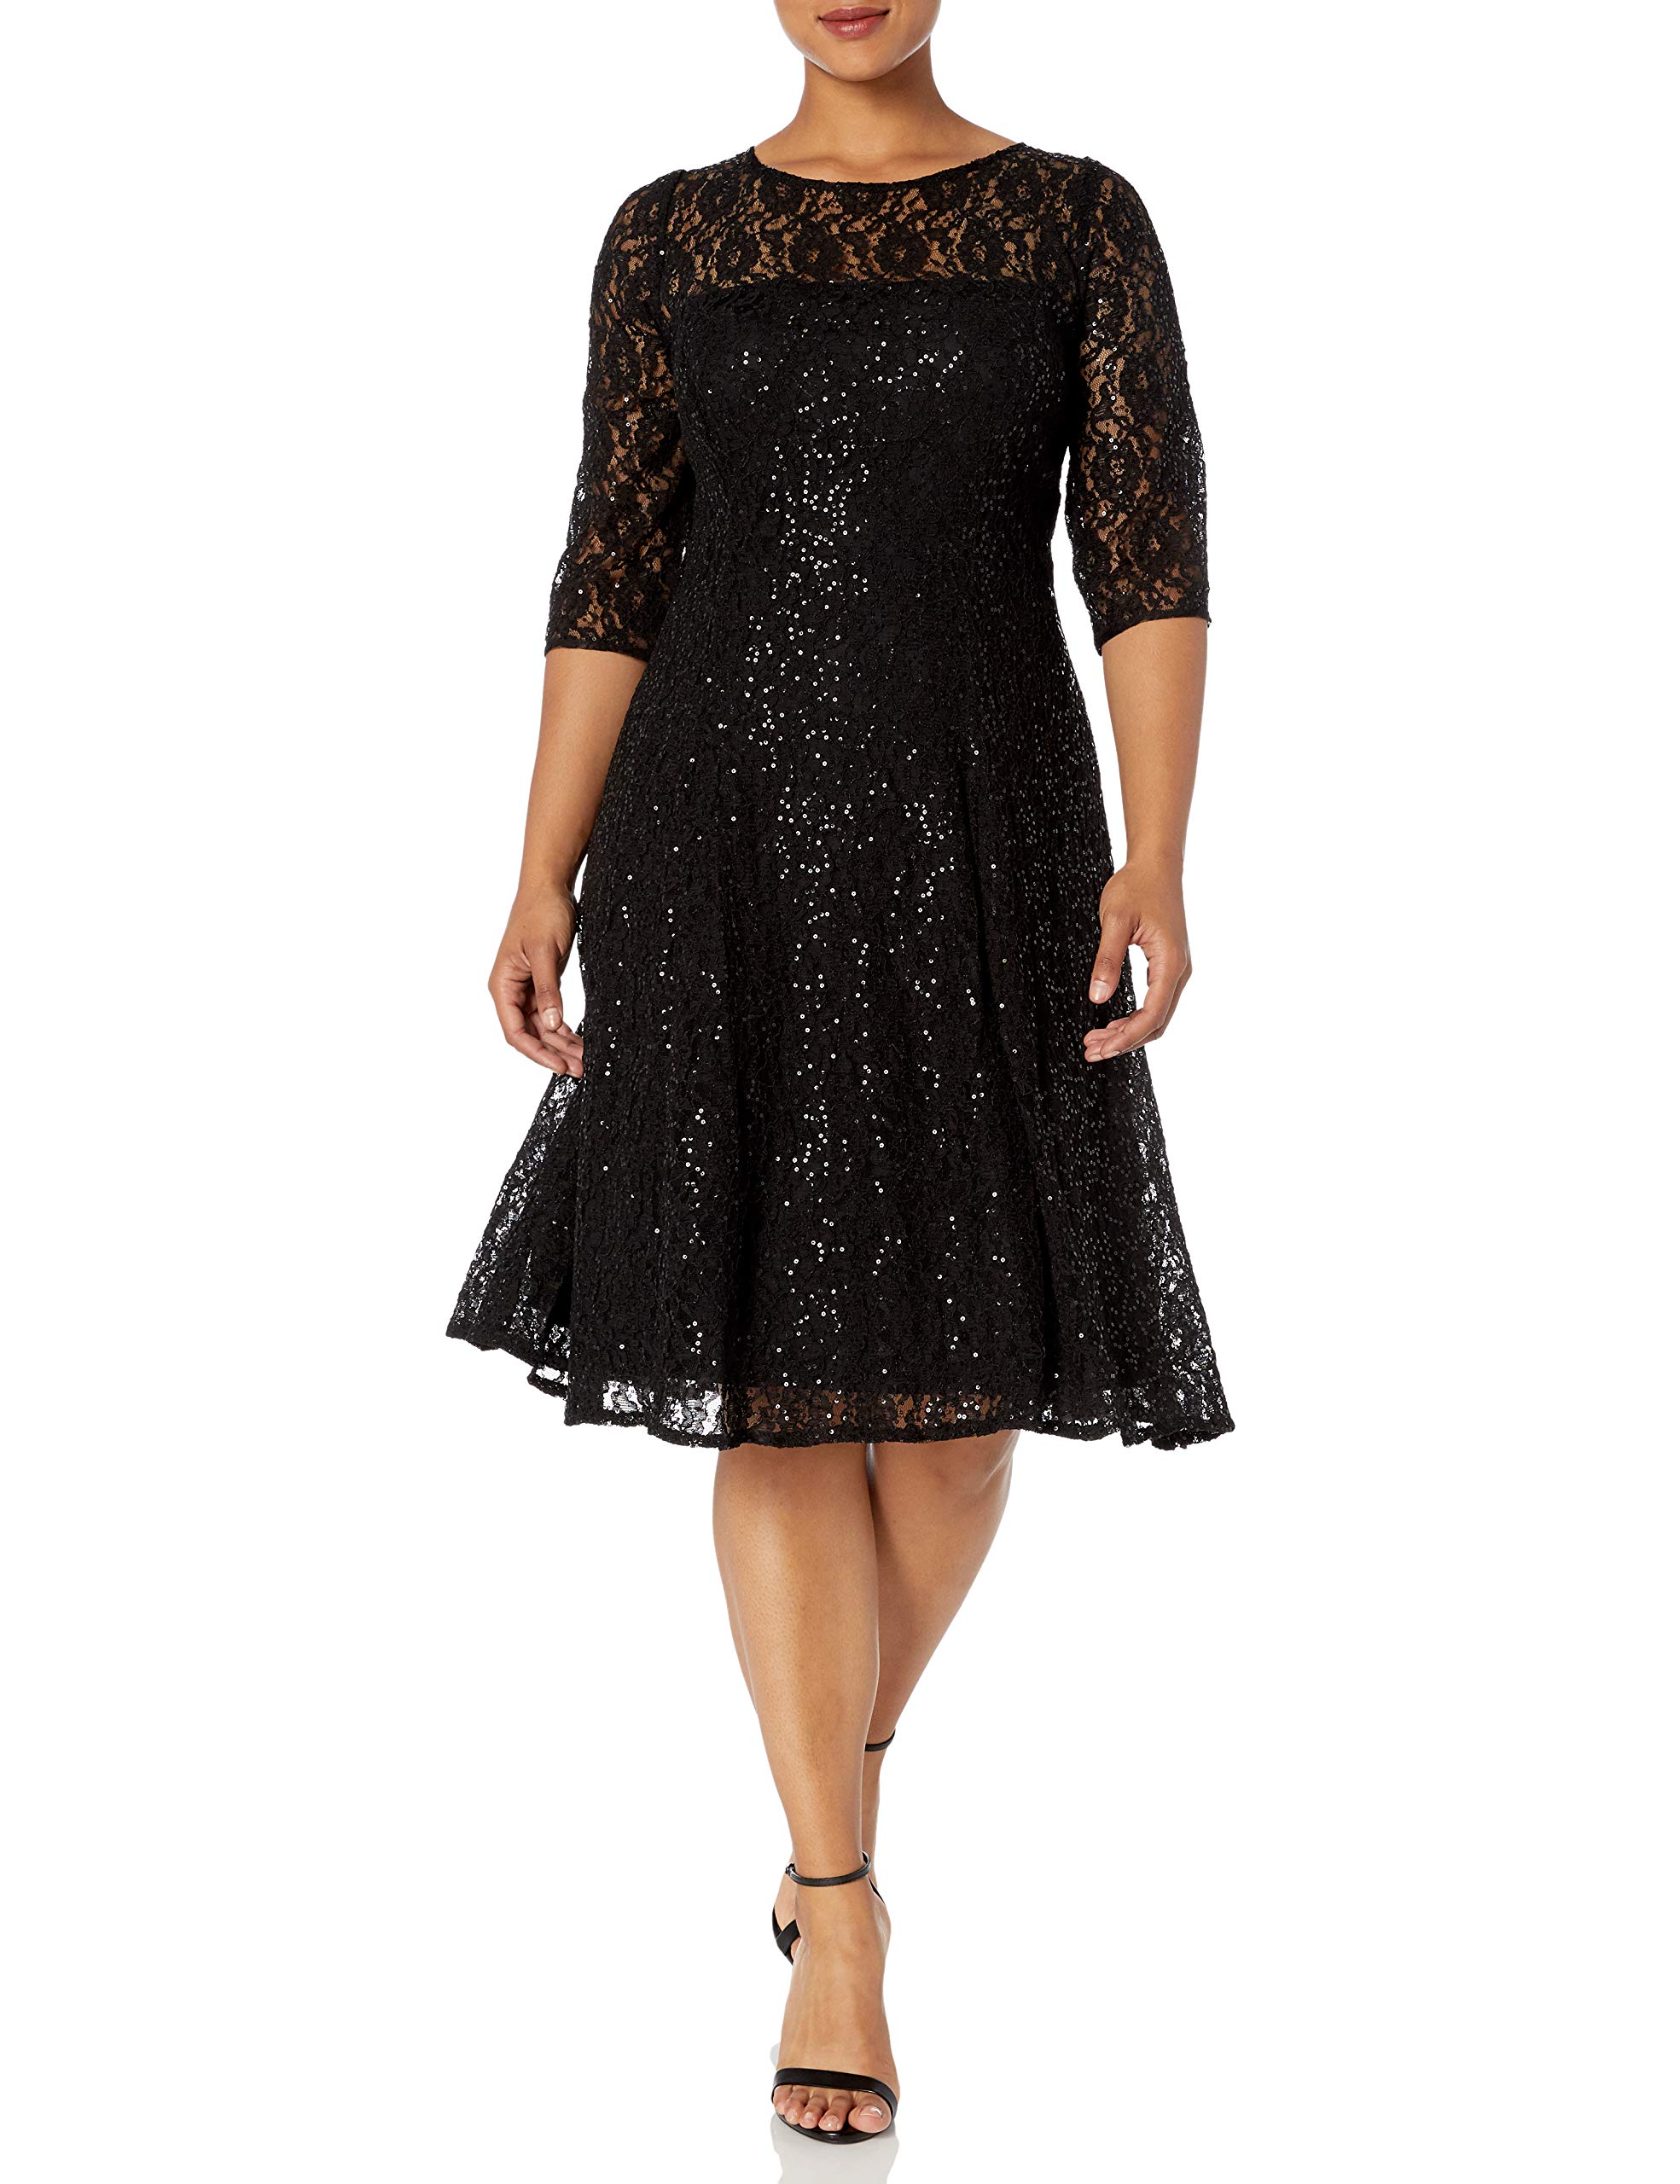 S.L. Fashions Women's Plus Size Lace and Sequin Fit and Flare Dress